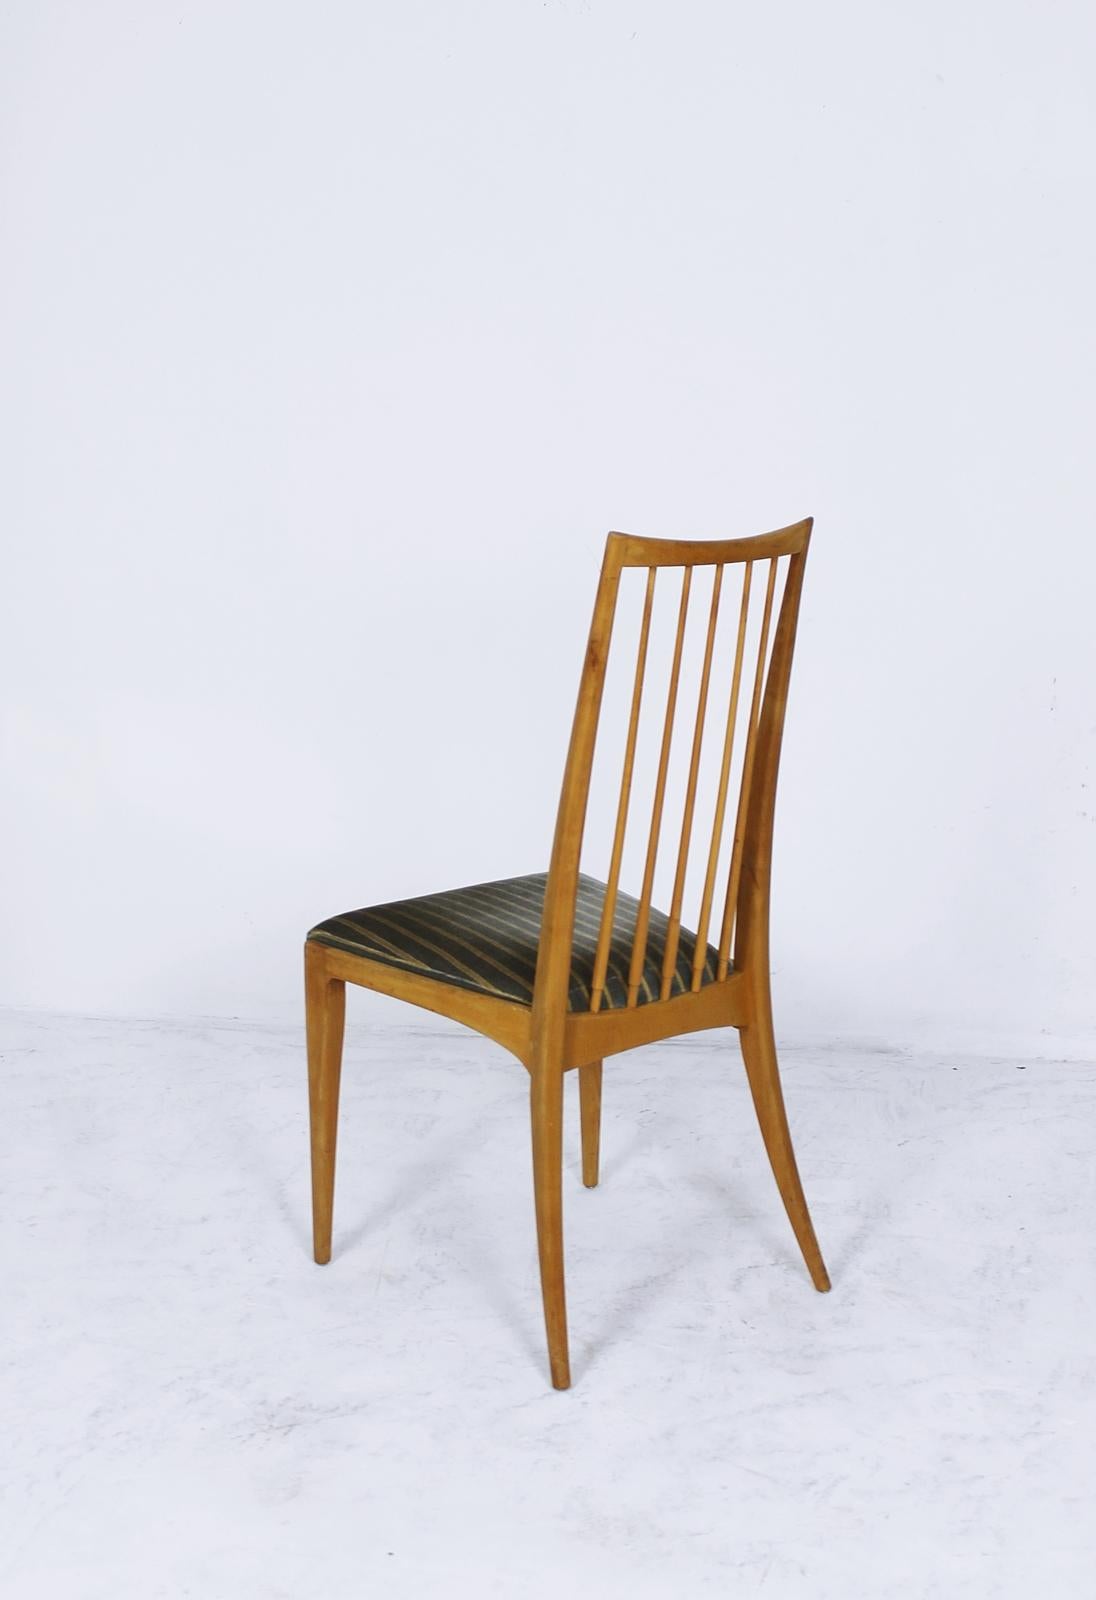 20th Century Filigree Chairs by Ernst Martin Dettinger for Lübke, Germany, 1960s For Sale